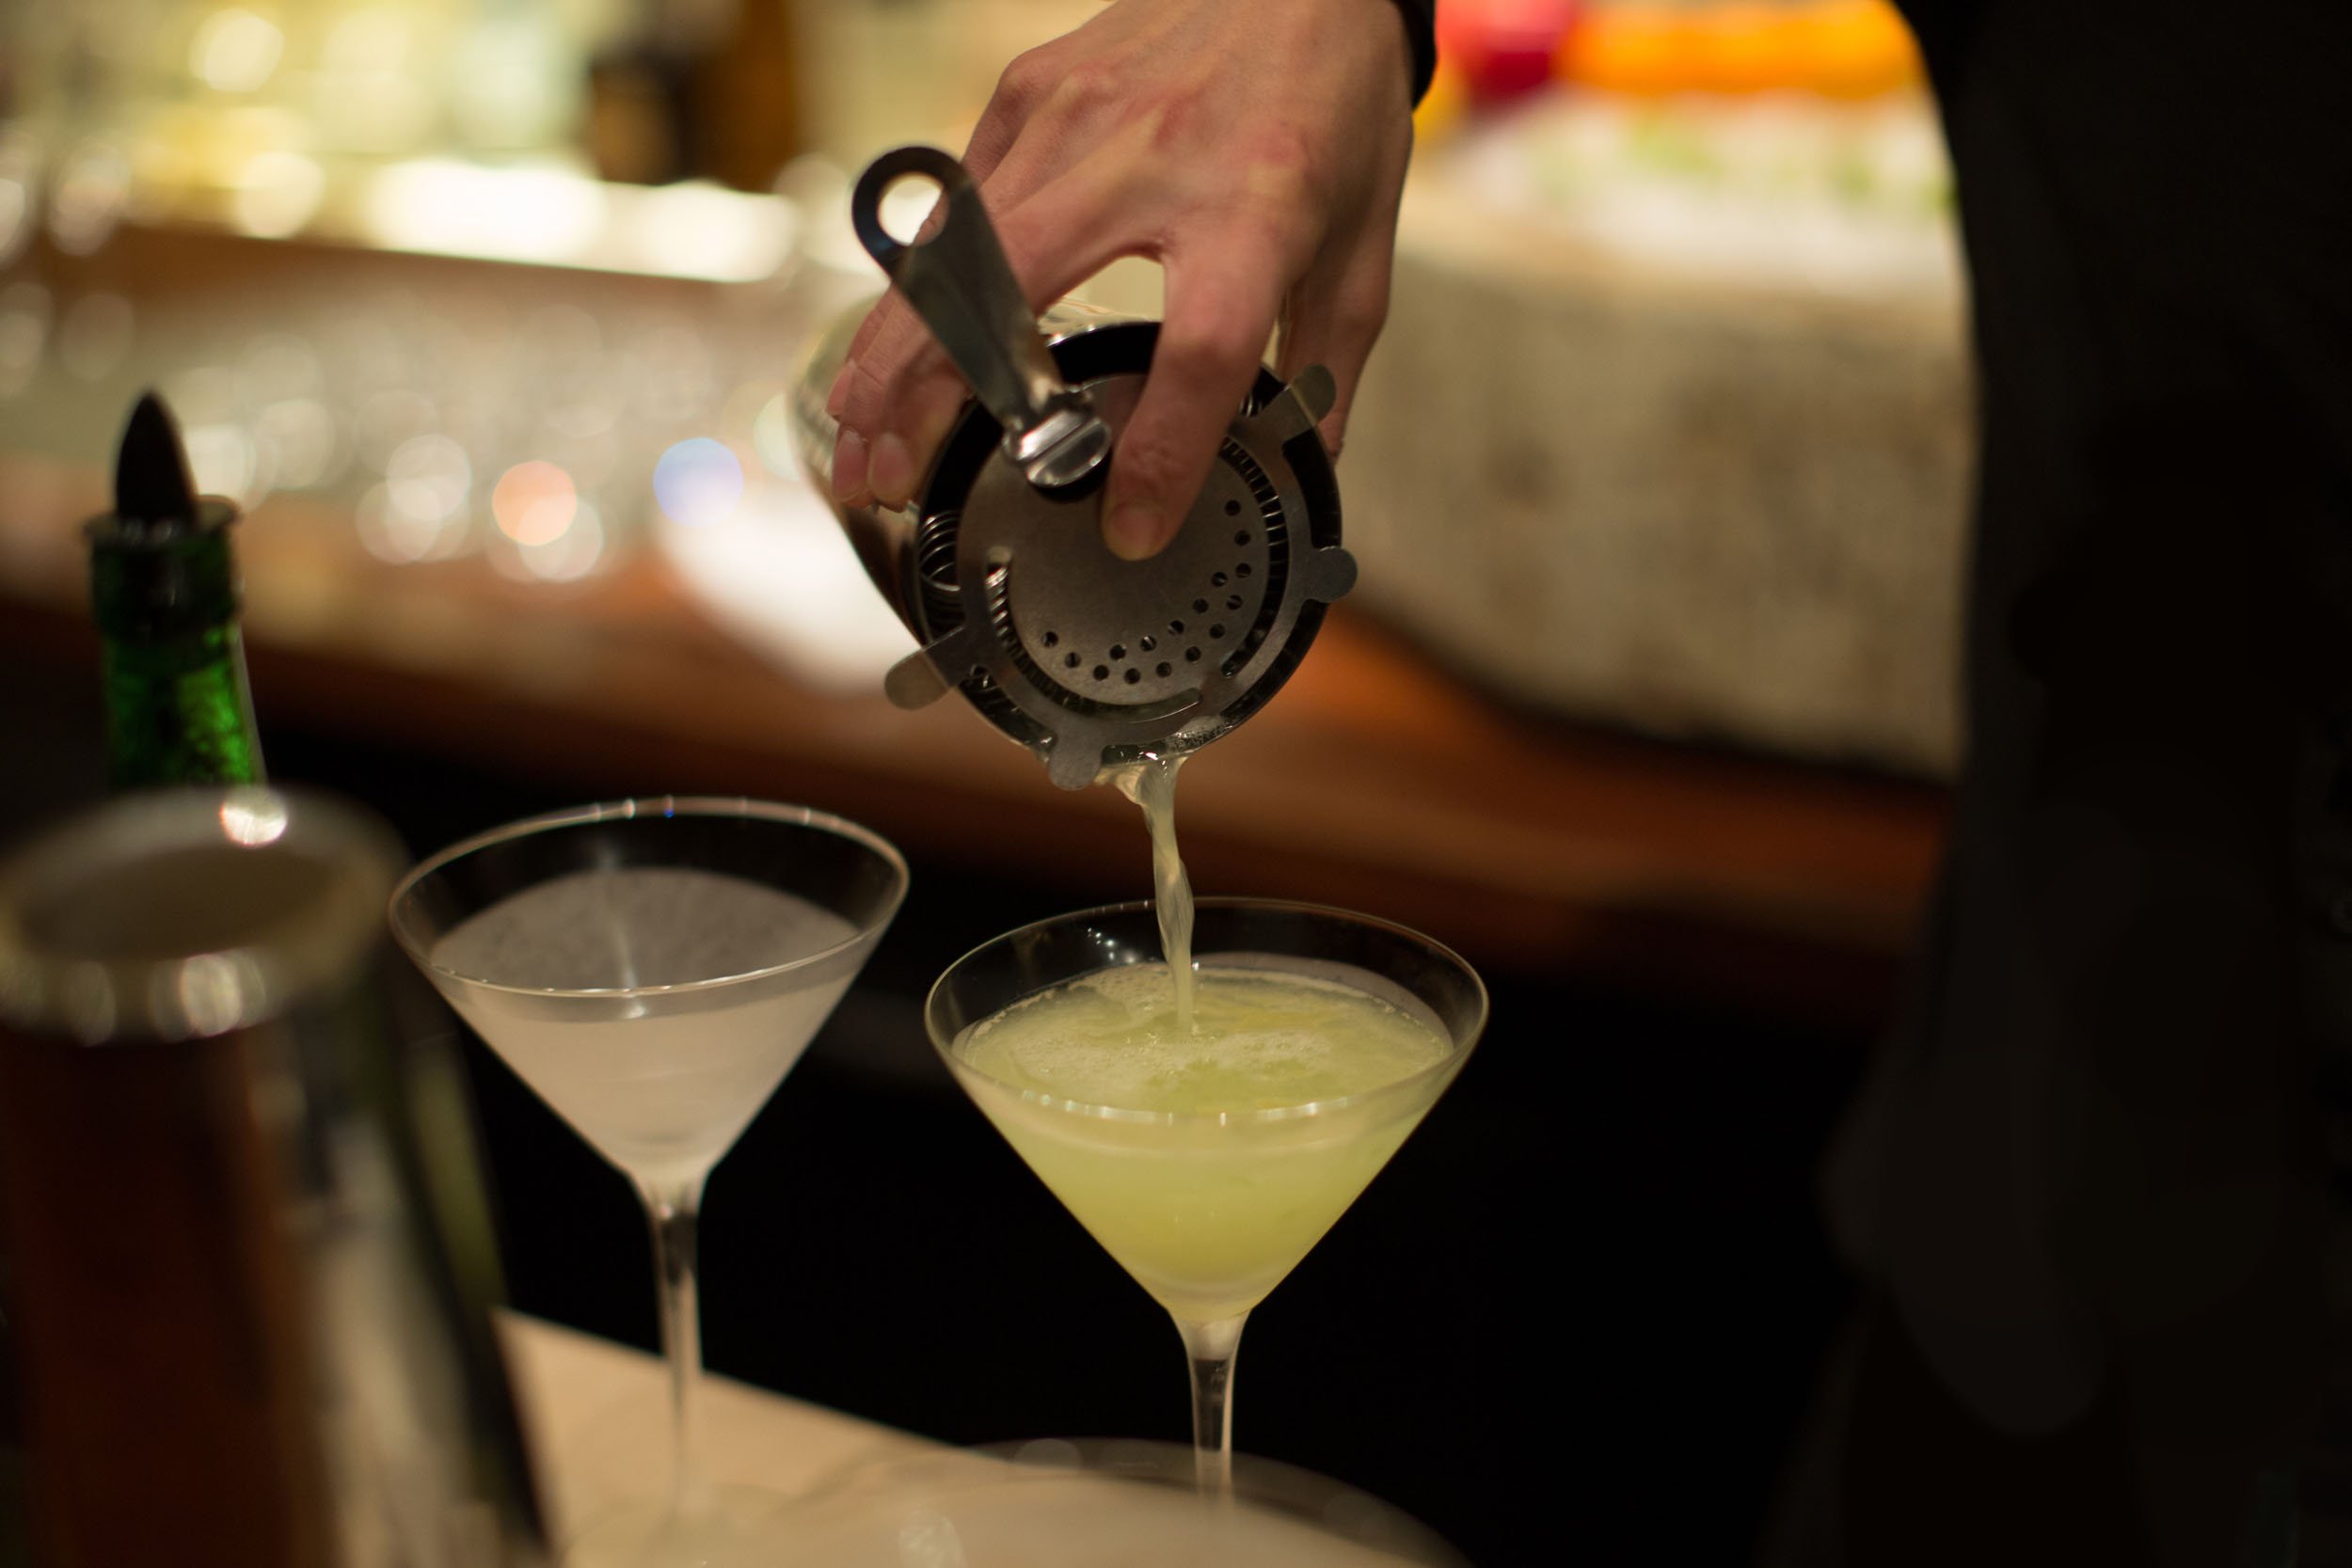  Closeup of a bartender’s hand pouring a green cocktail from a shaker into a martini glass, which is next to another filled glass. 